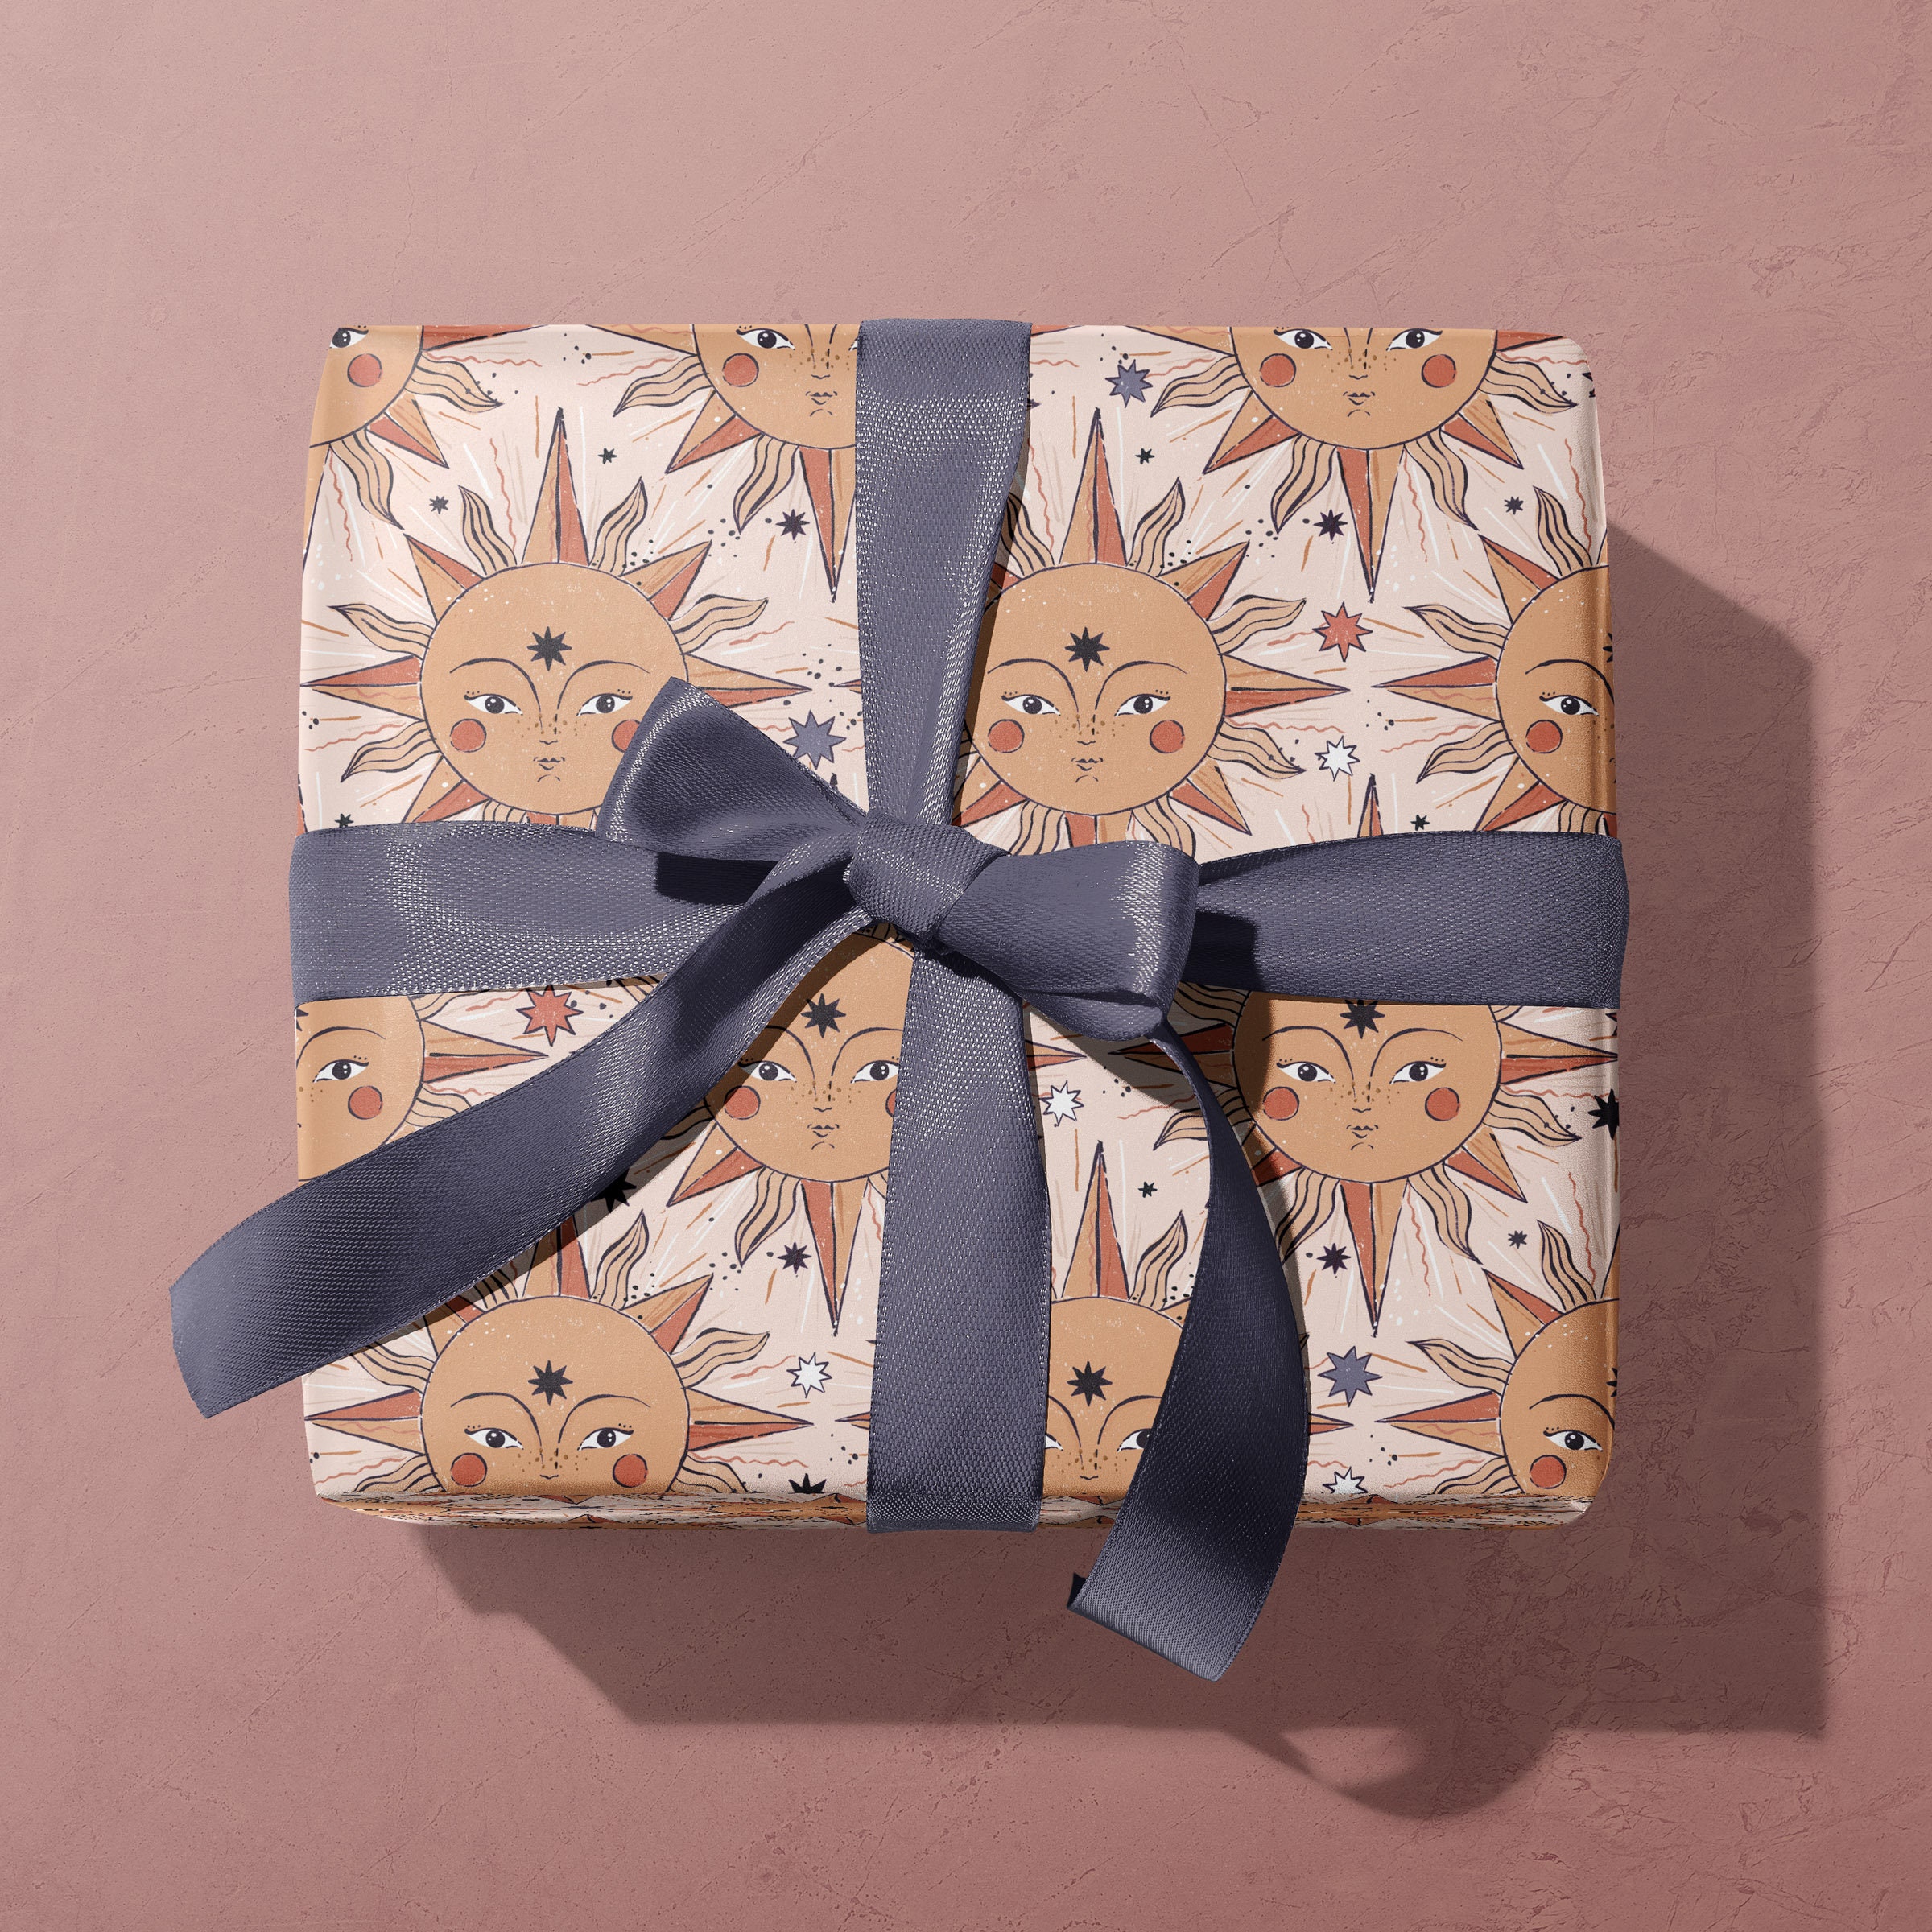 white gift wrapping paper - Sunlight Industry Limited